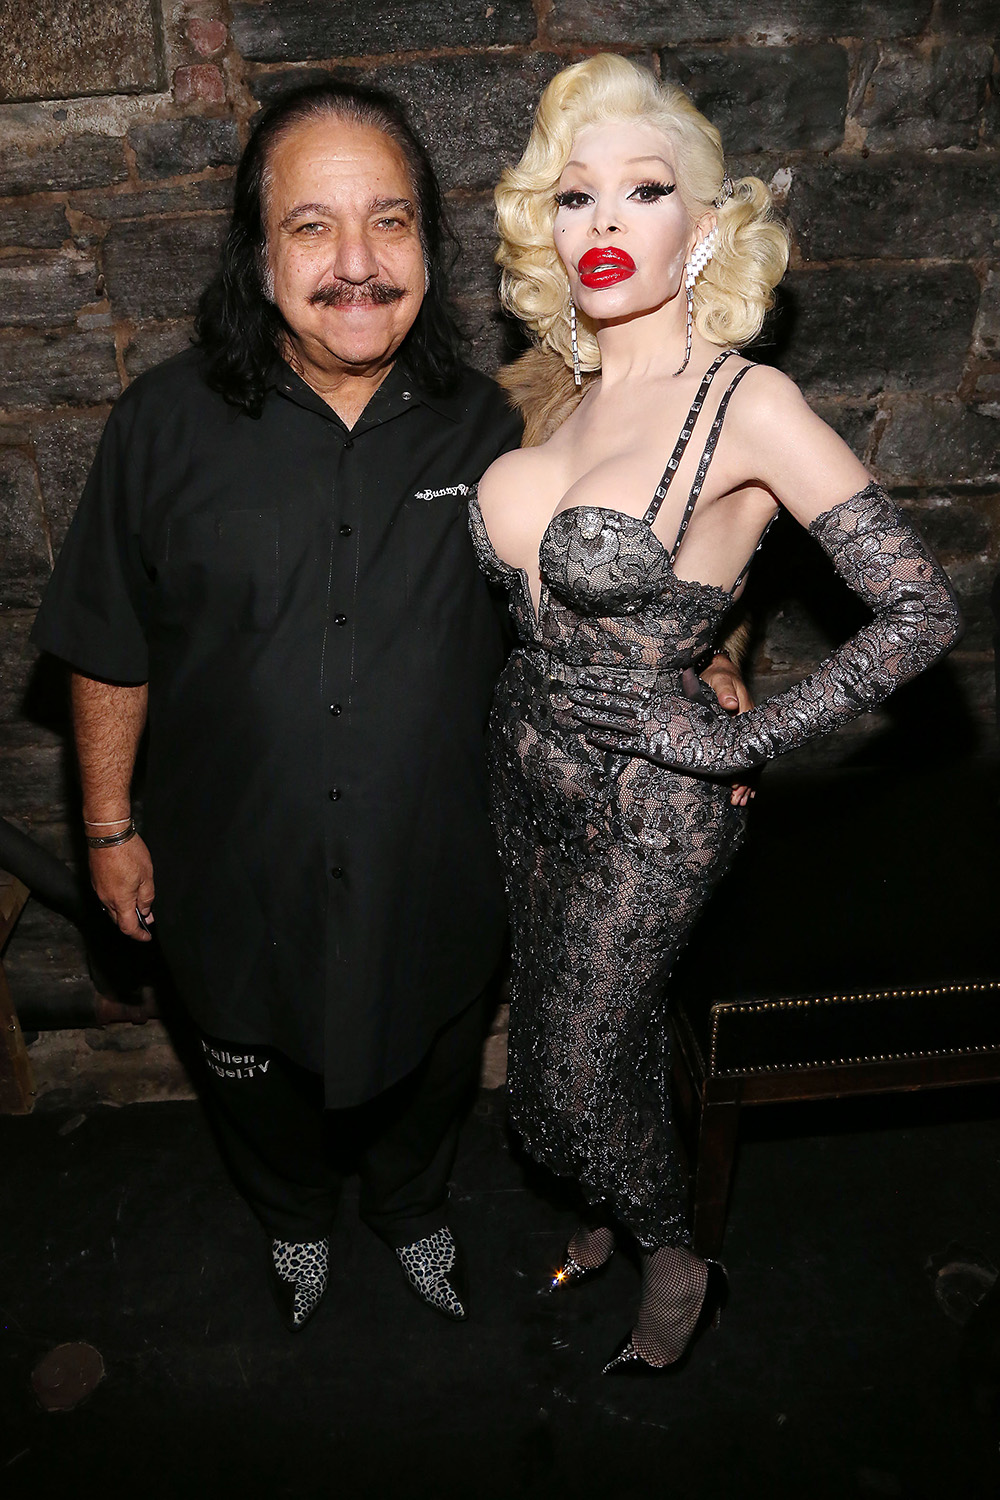 audrey emerson recommends Ron Jeremy When Young